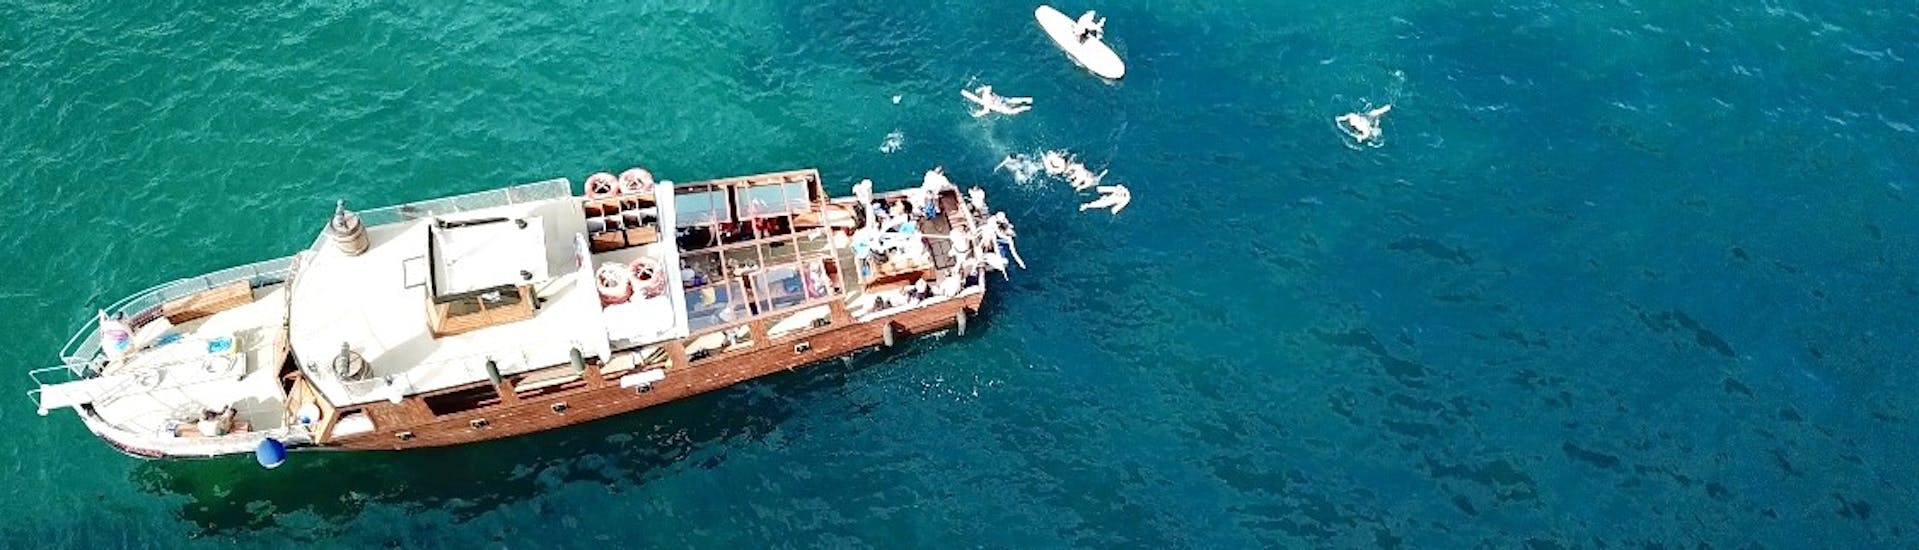 A view of our boat during a Pirate Boat Trip from Pollença with Snorkeling, SUP & Paella with Robinson Boat Trips.